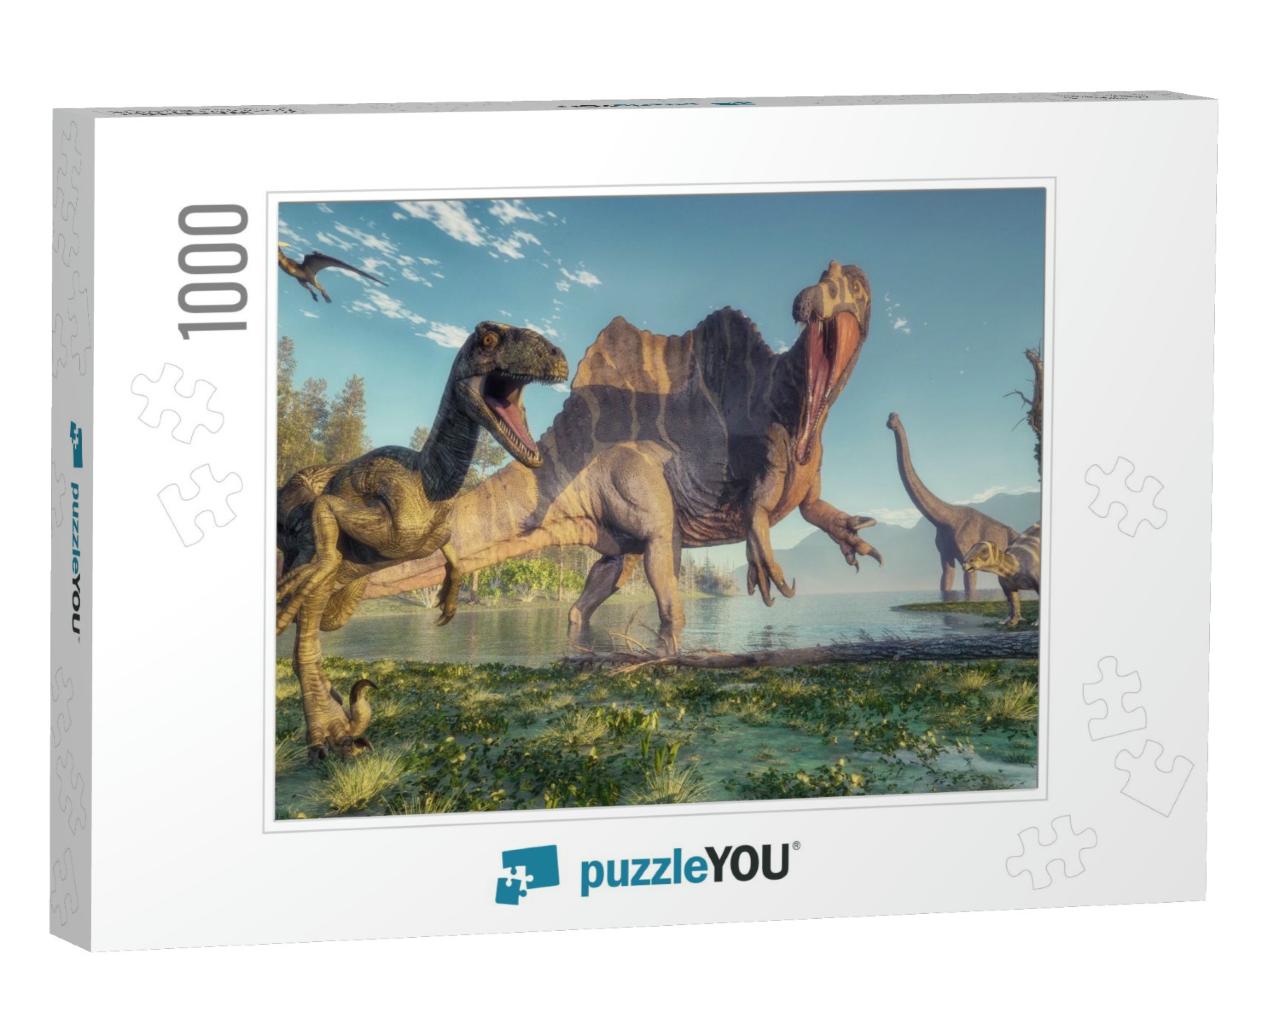 Spinosaurus & Deinonychus in the Jungle. This is a 3D Ren... Jigsaw Puzzle with 1000 pieces